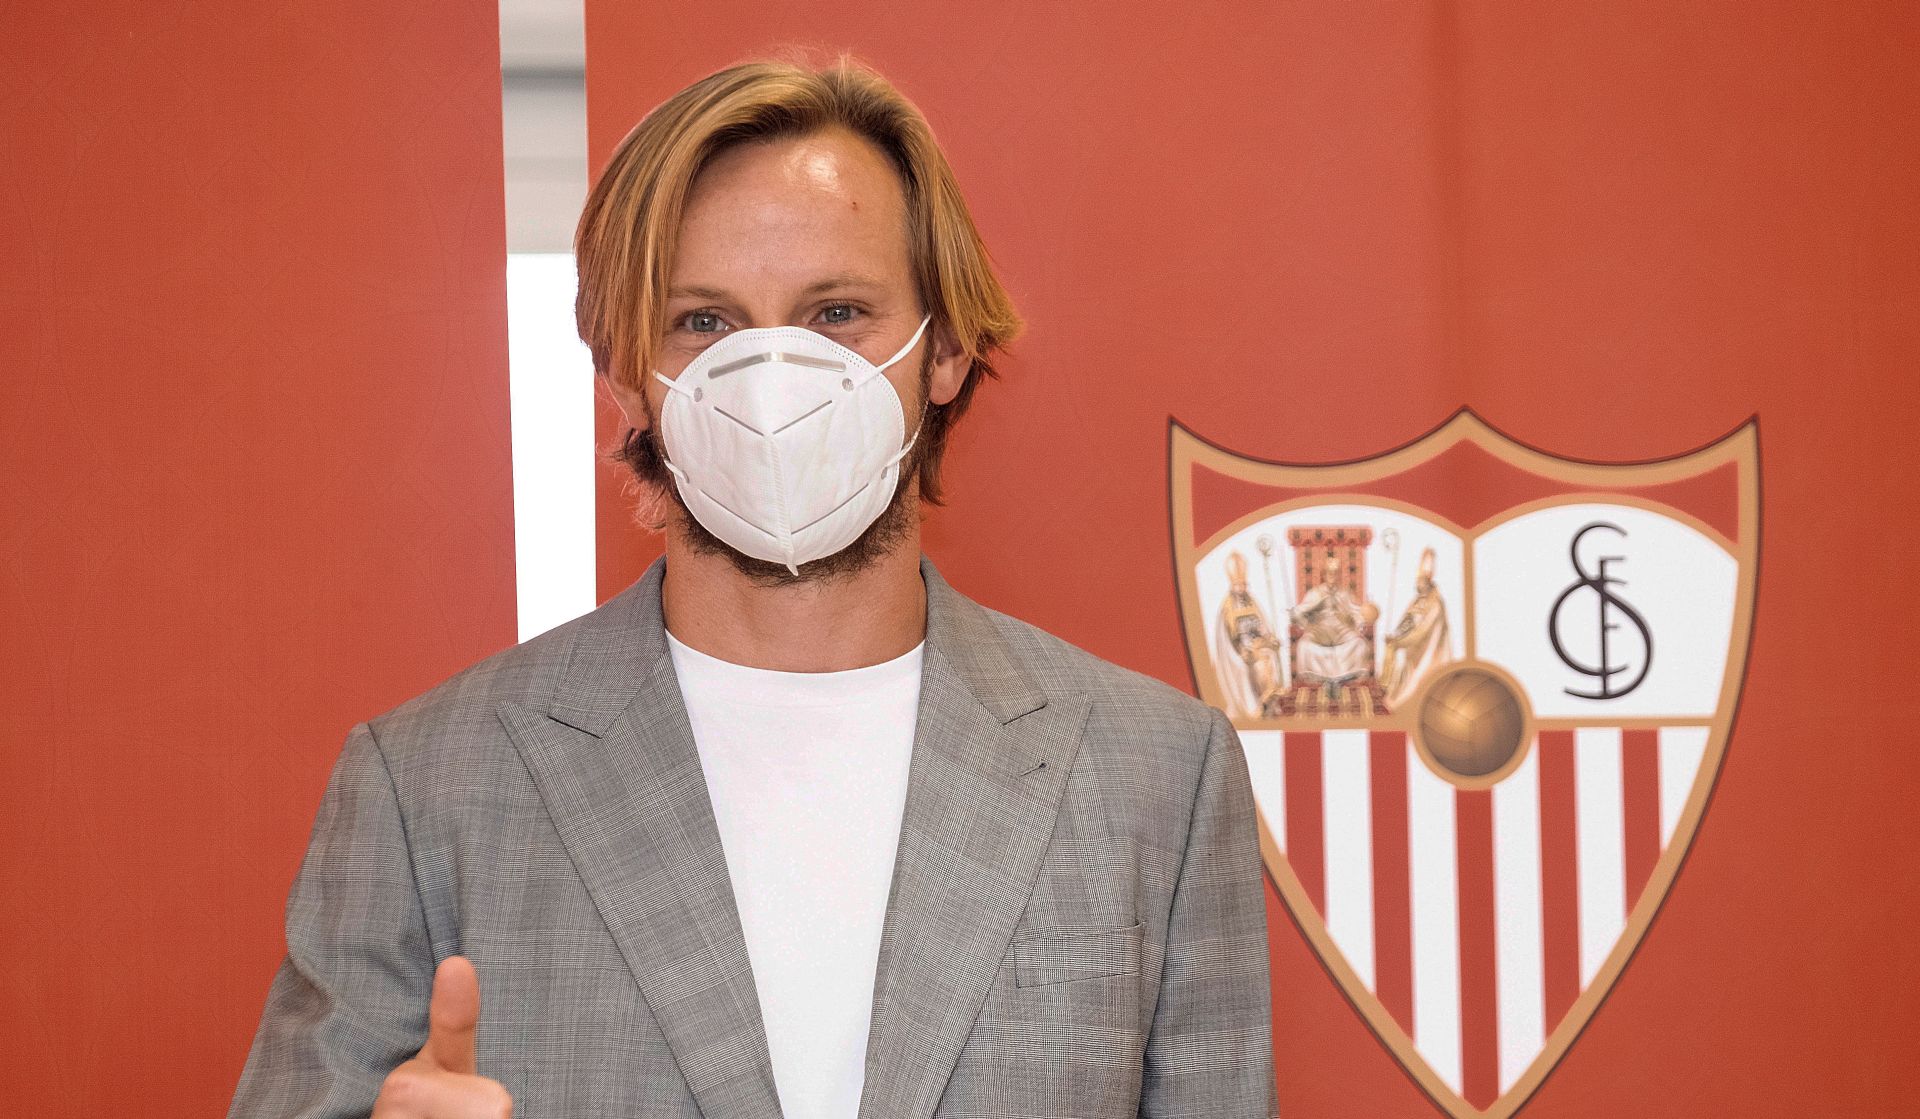 epa08642152 Croatian midfielder Ivan Rakitic poses for photographers during his arrival to the airport on occasion of his presentation as a new Sevilla FC player, in Sevilla, Spain, 02 September 2020. Rakitic has signed a 4-year deal with Sevilla, his previous club before FC Barcelona.  EPA/Pepo Herrera